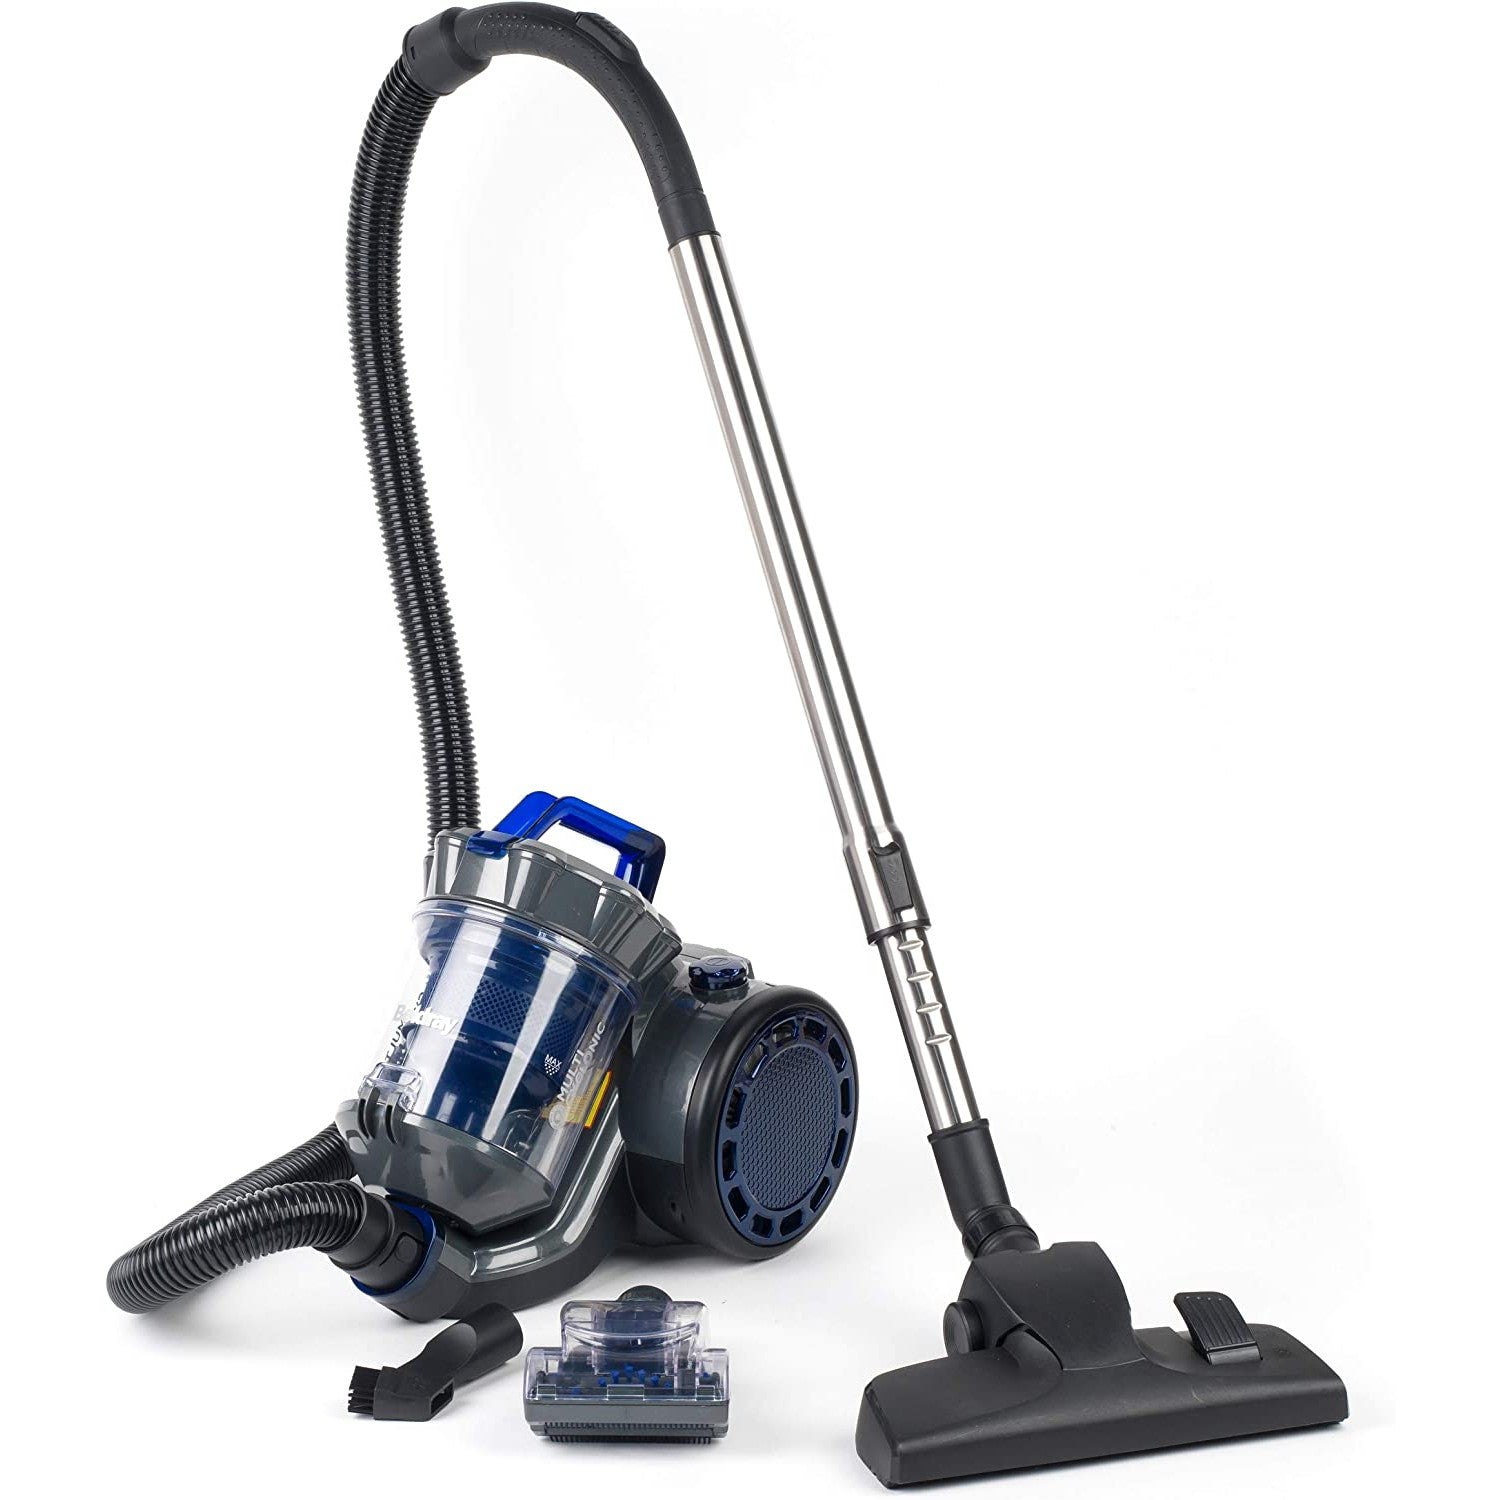 Beldray 700W Multi-Cyclonic Pet+ Vacuum Cleaner with 2-In-1 Crevice Tool